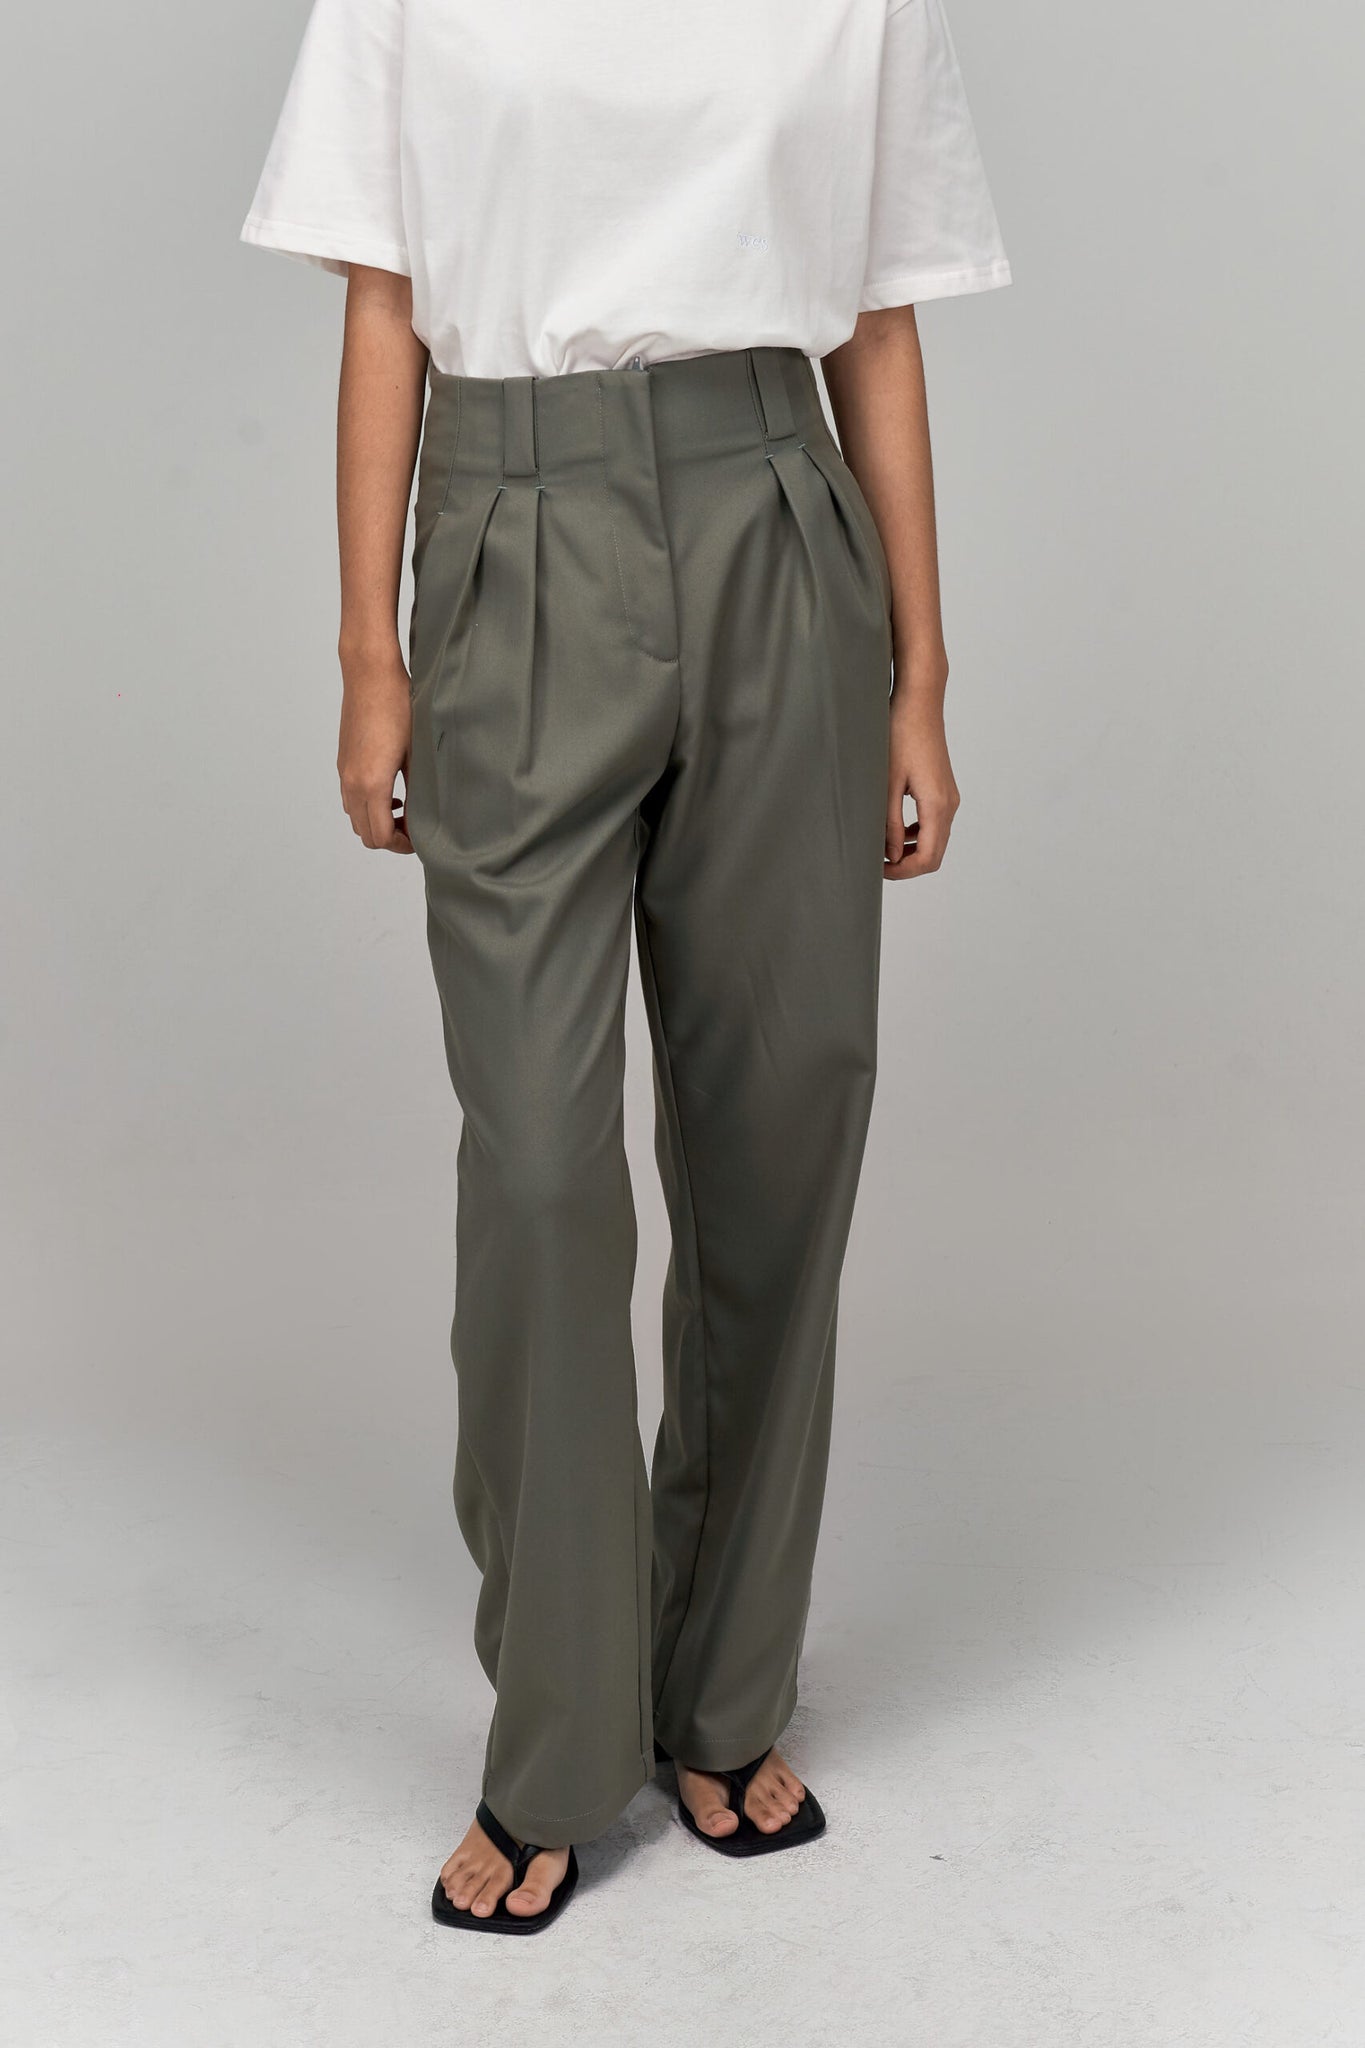 THE WES STUDIO Classic Medium Rise Forward Pleated Trousers: Olive Grey